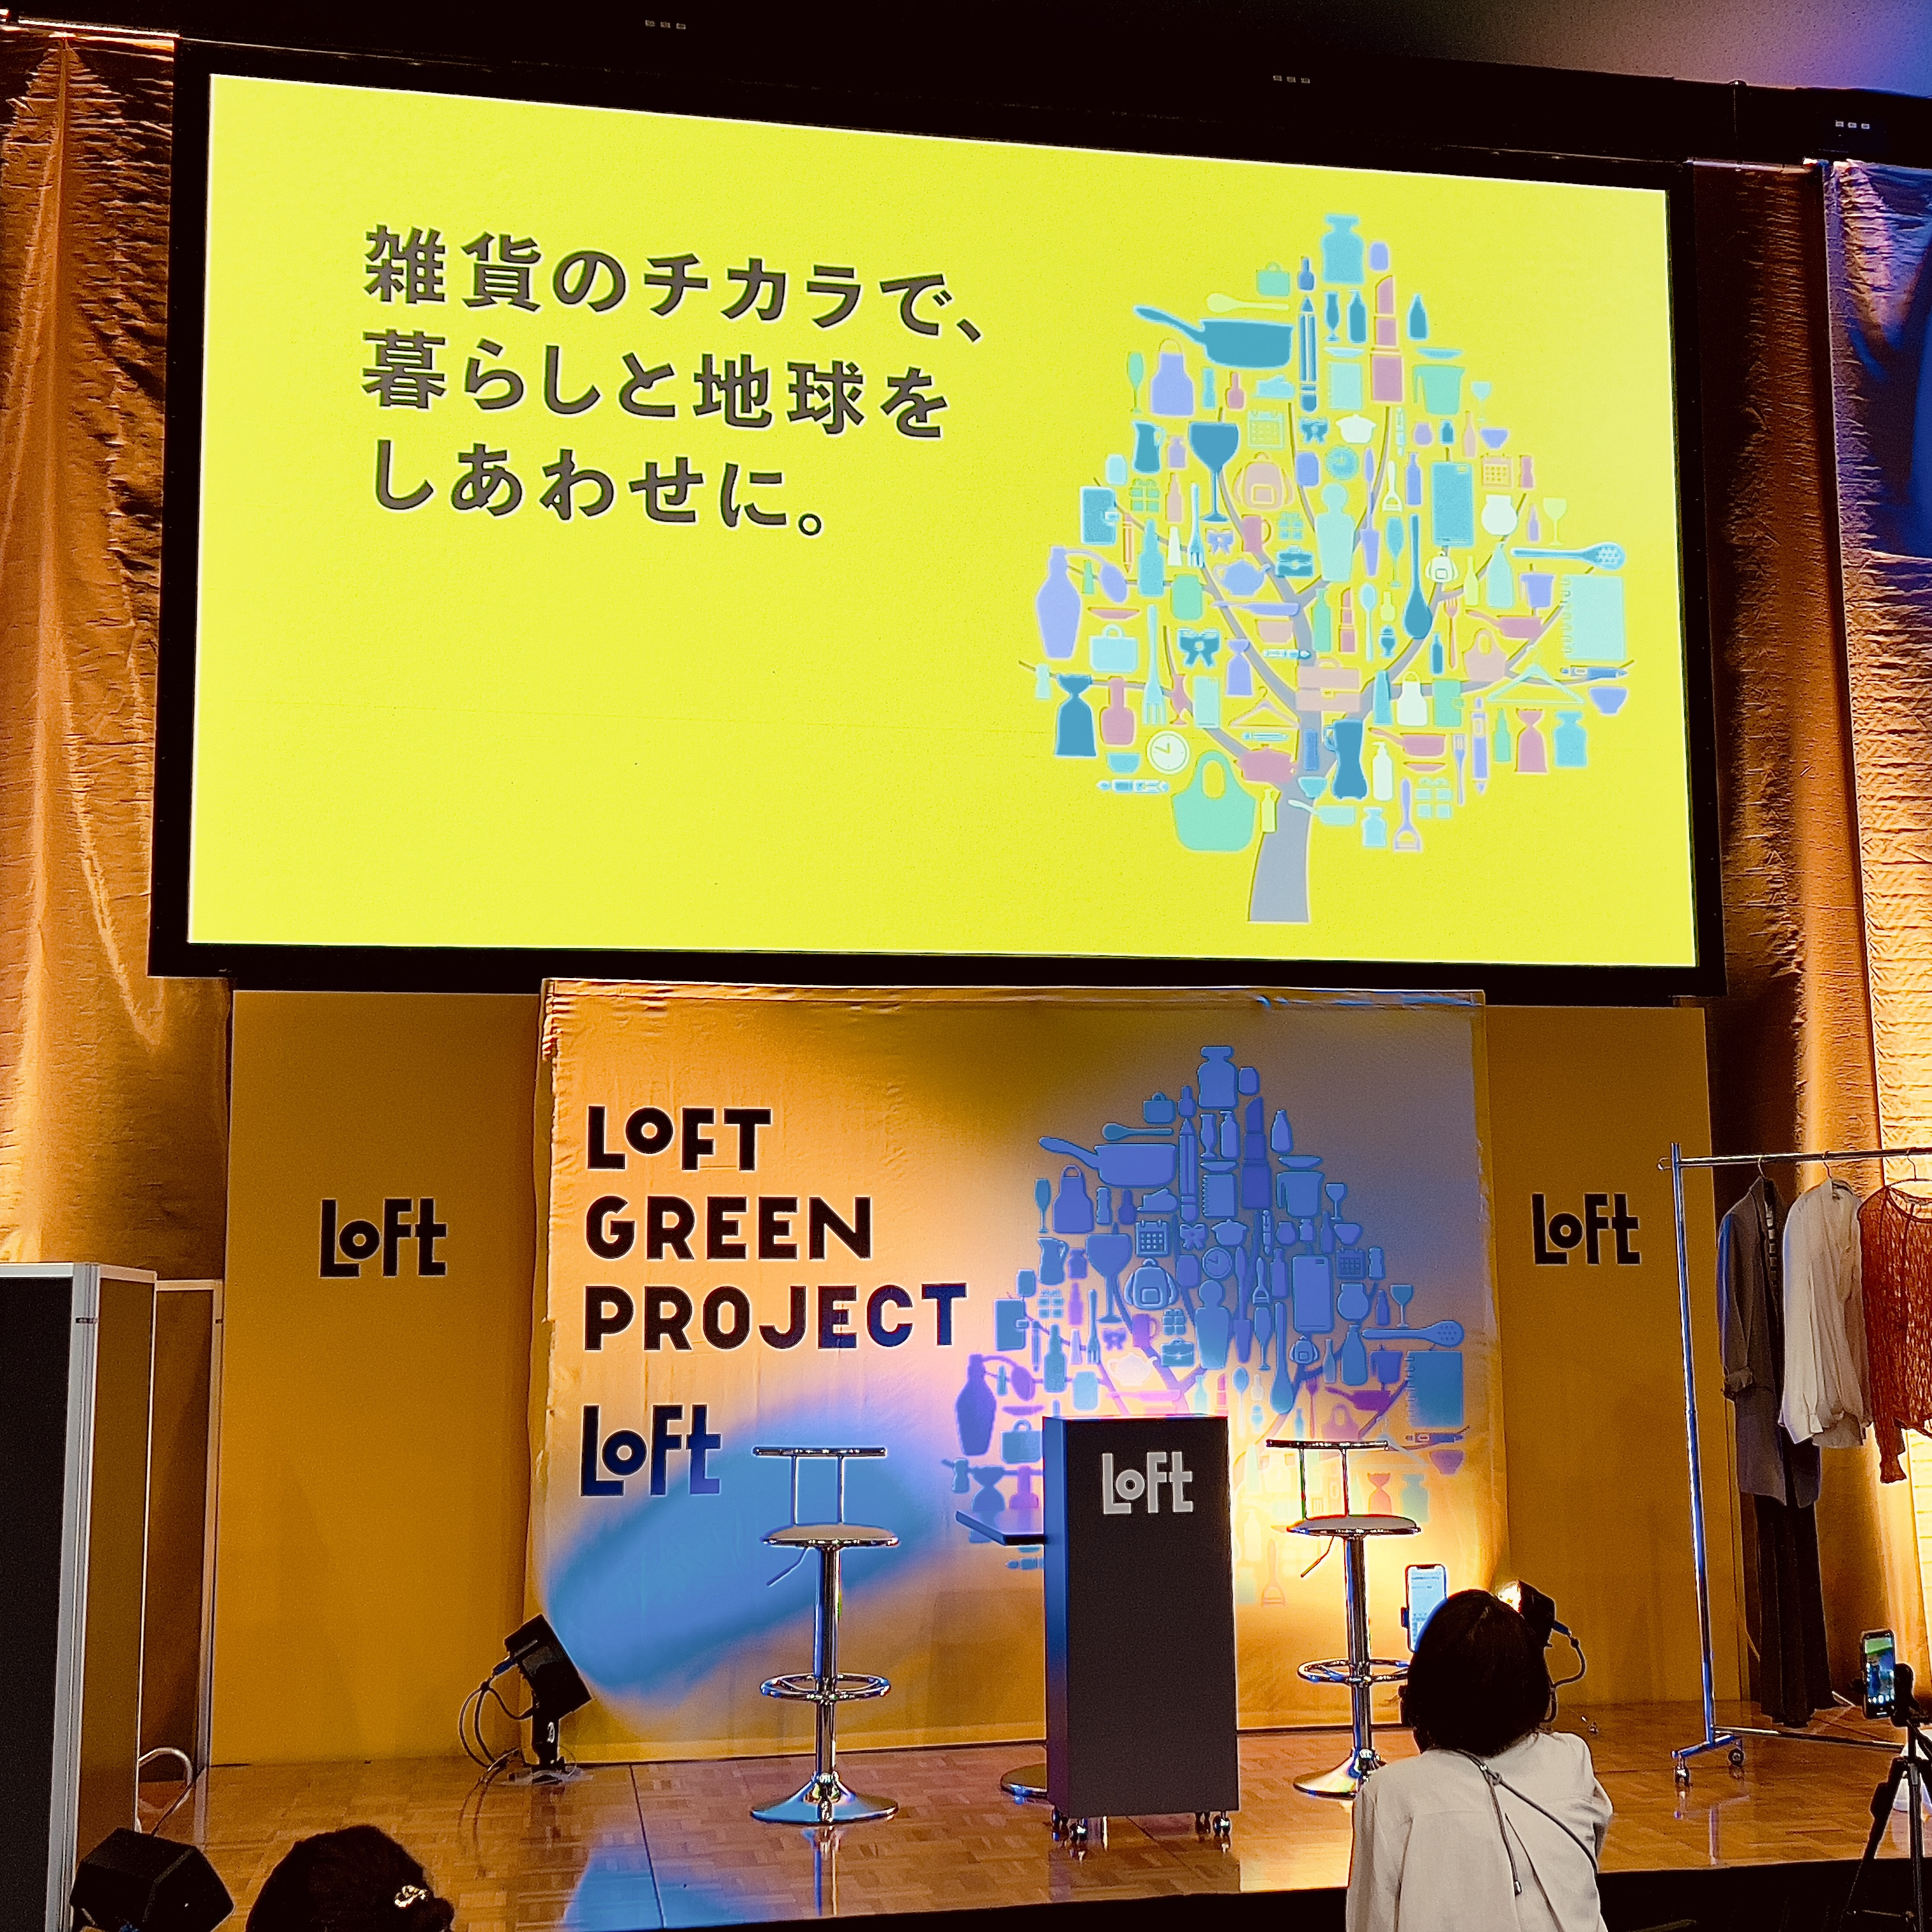 【Works】LOFT GREEN PROJECT〜Sustainable Beauty and Life〜